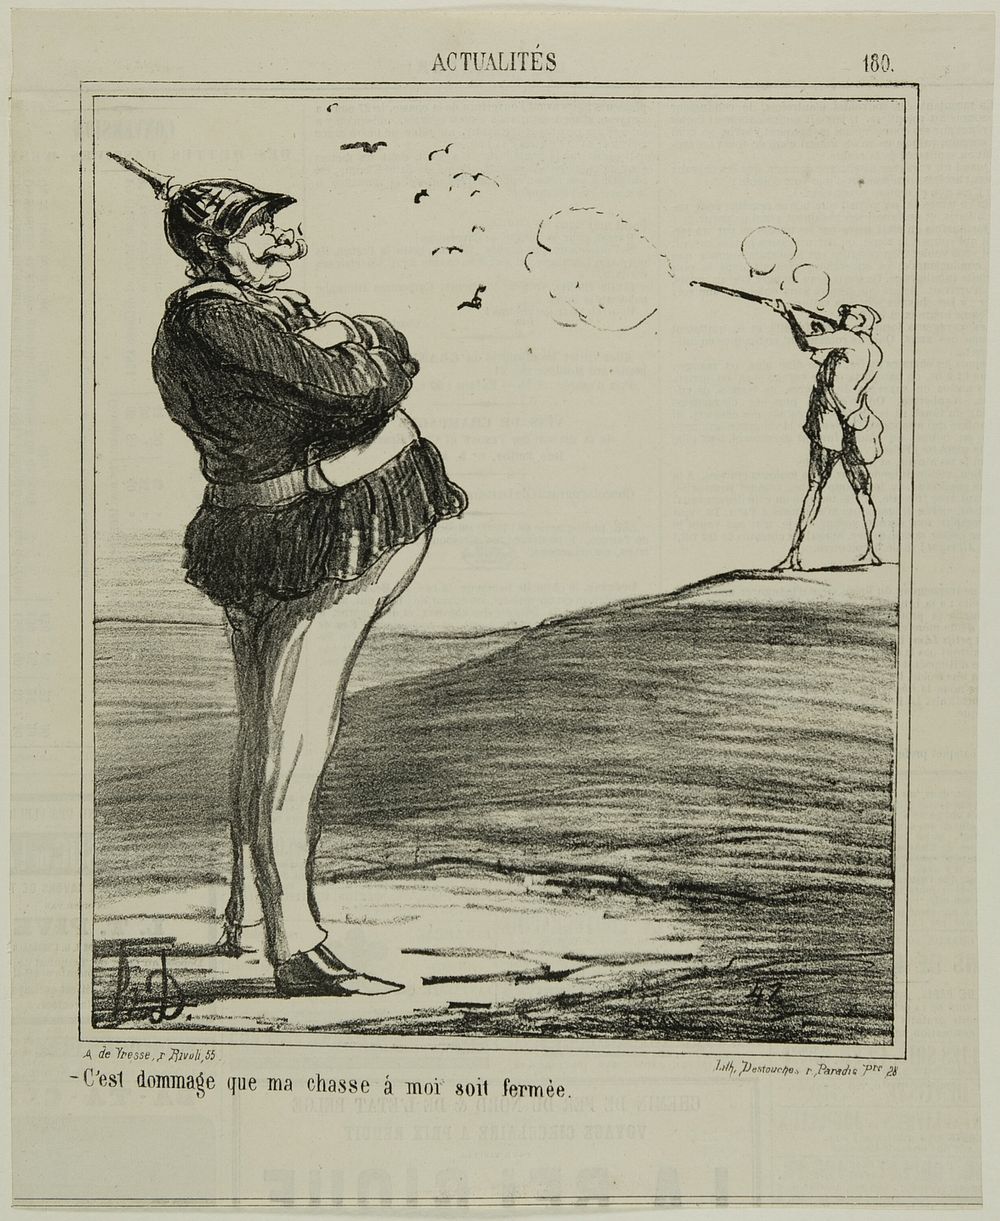 “-What a shame that I am not allowed go hunting,” plate 180 from Actualitiés by Honoré-Victorin Daumier